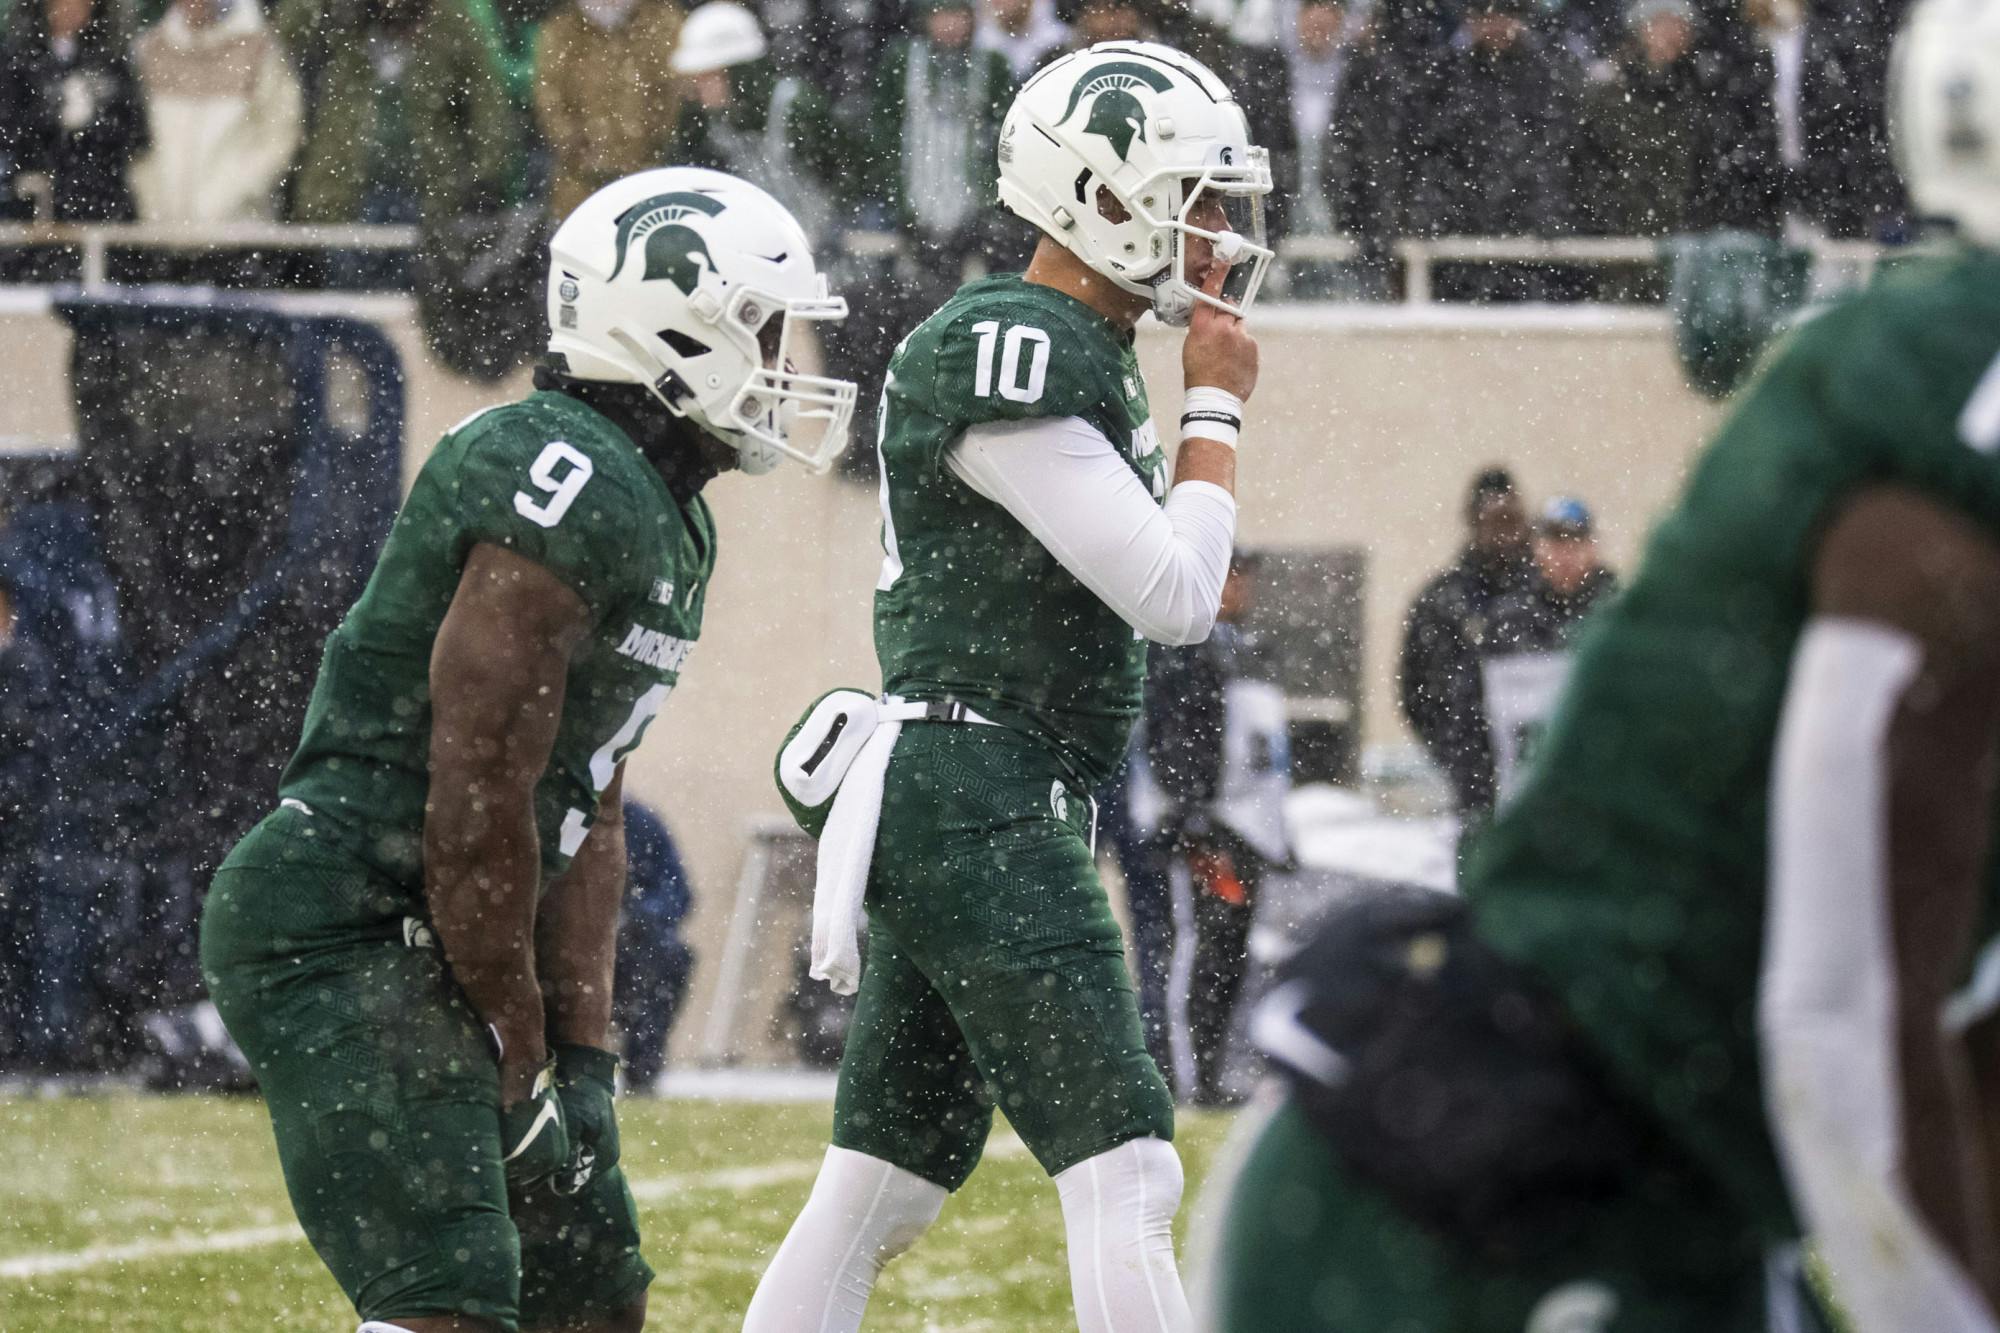 <p>Thorne (10) and Walker (9) in the Spartan’s game against the Penn State Nittany Lions at Spartan Stadium on Saturday, Nov. 27, 2021. </p>